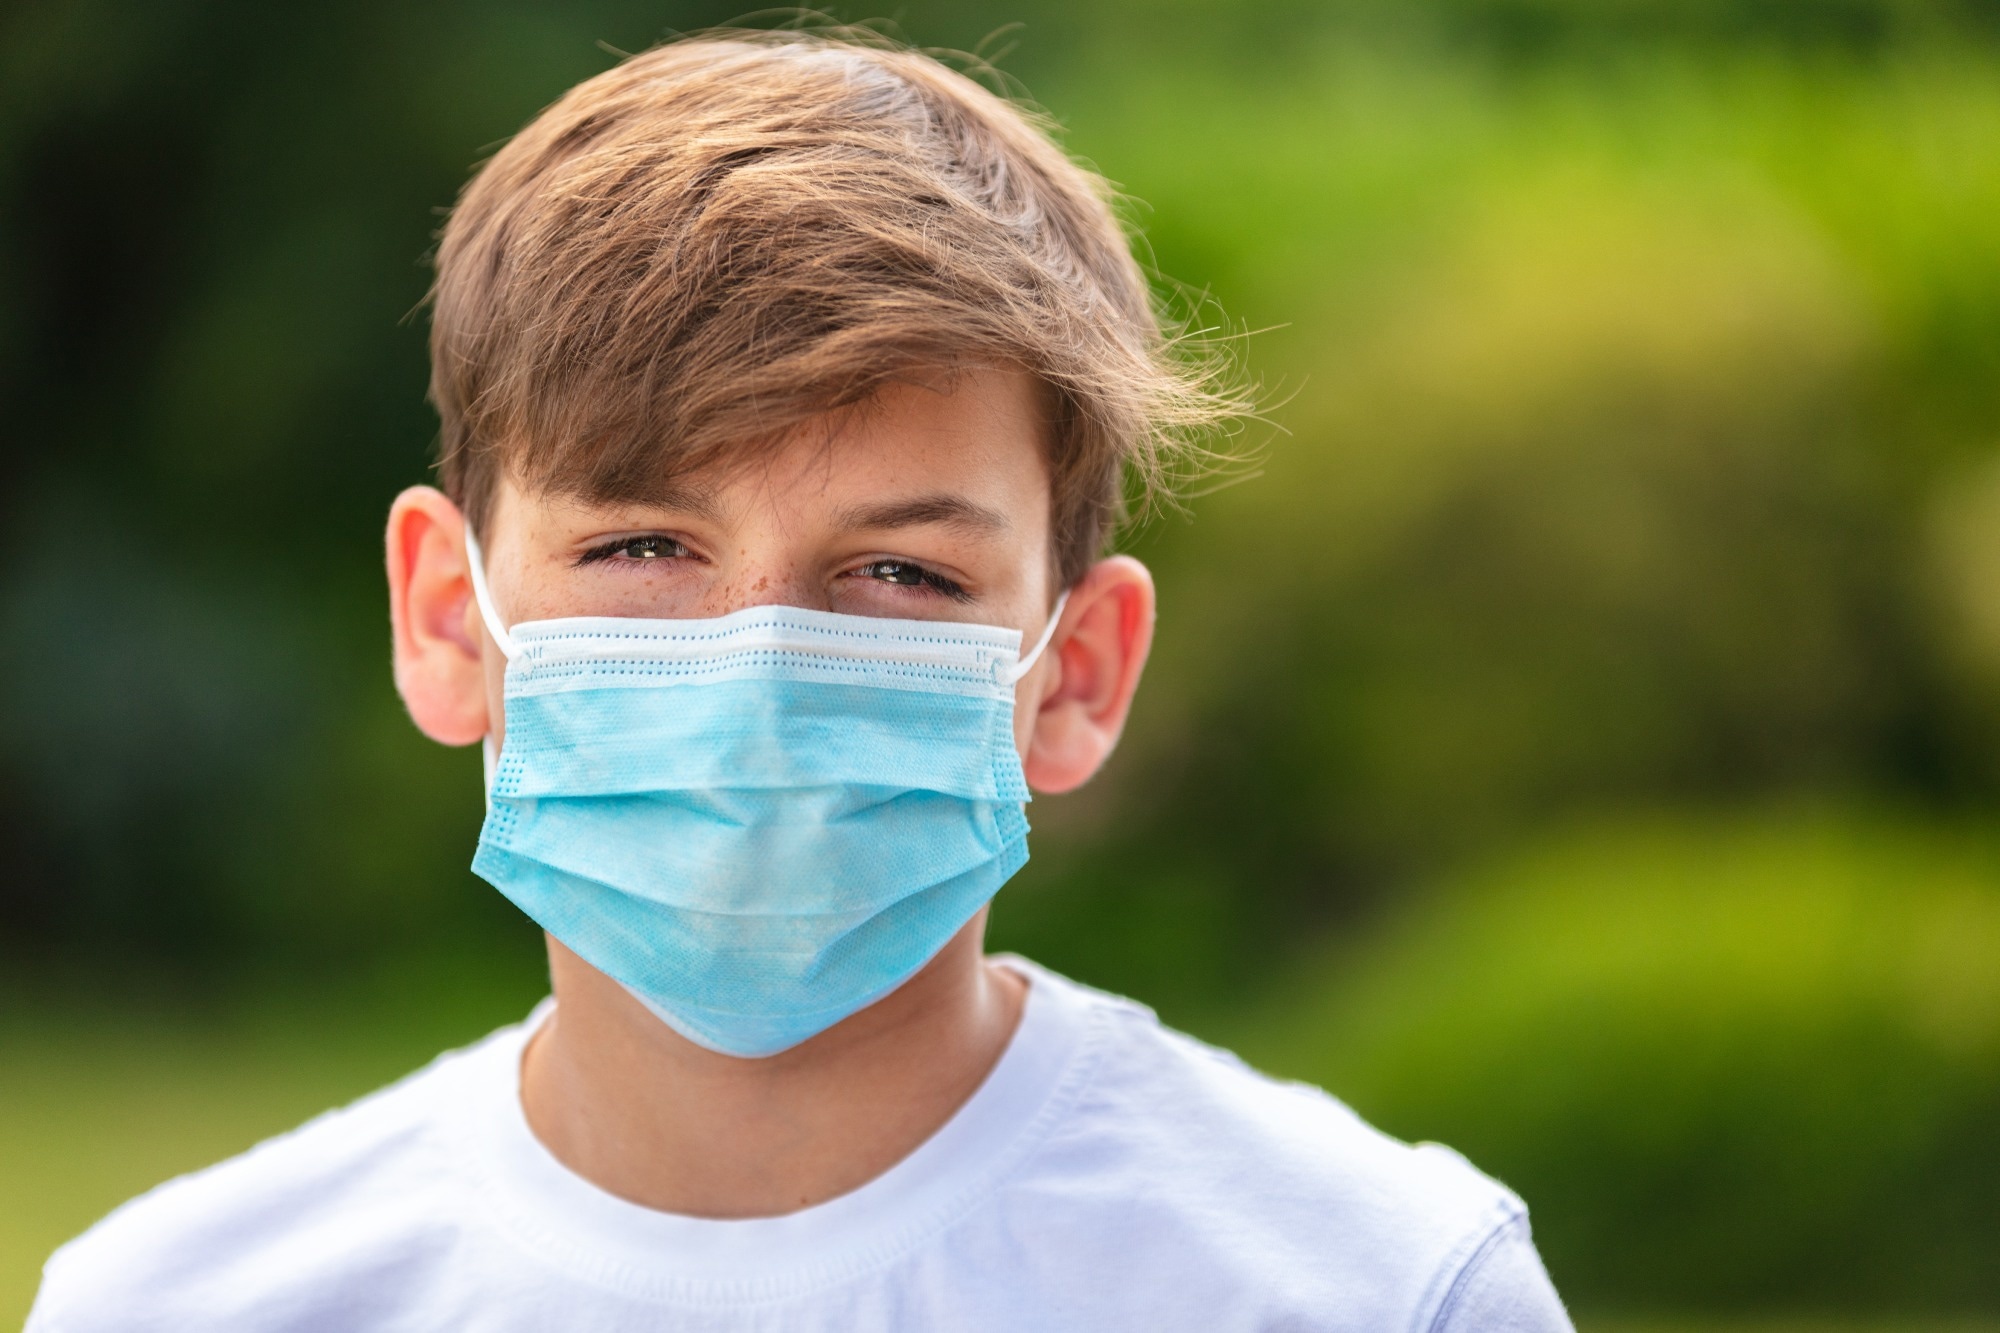 Study: Smart Thermometer–Based Participatory Surveillance to Discern the Role of Children in Household Viral Transmission During the COVID-19 Pandemic. Image Credit: DarrenBaker/Shutterstock.com